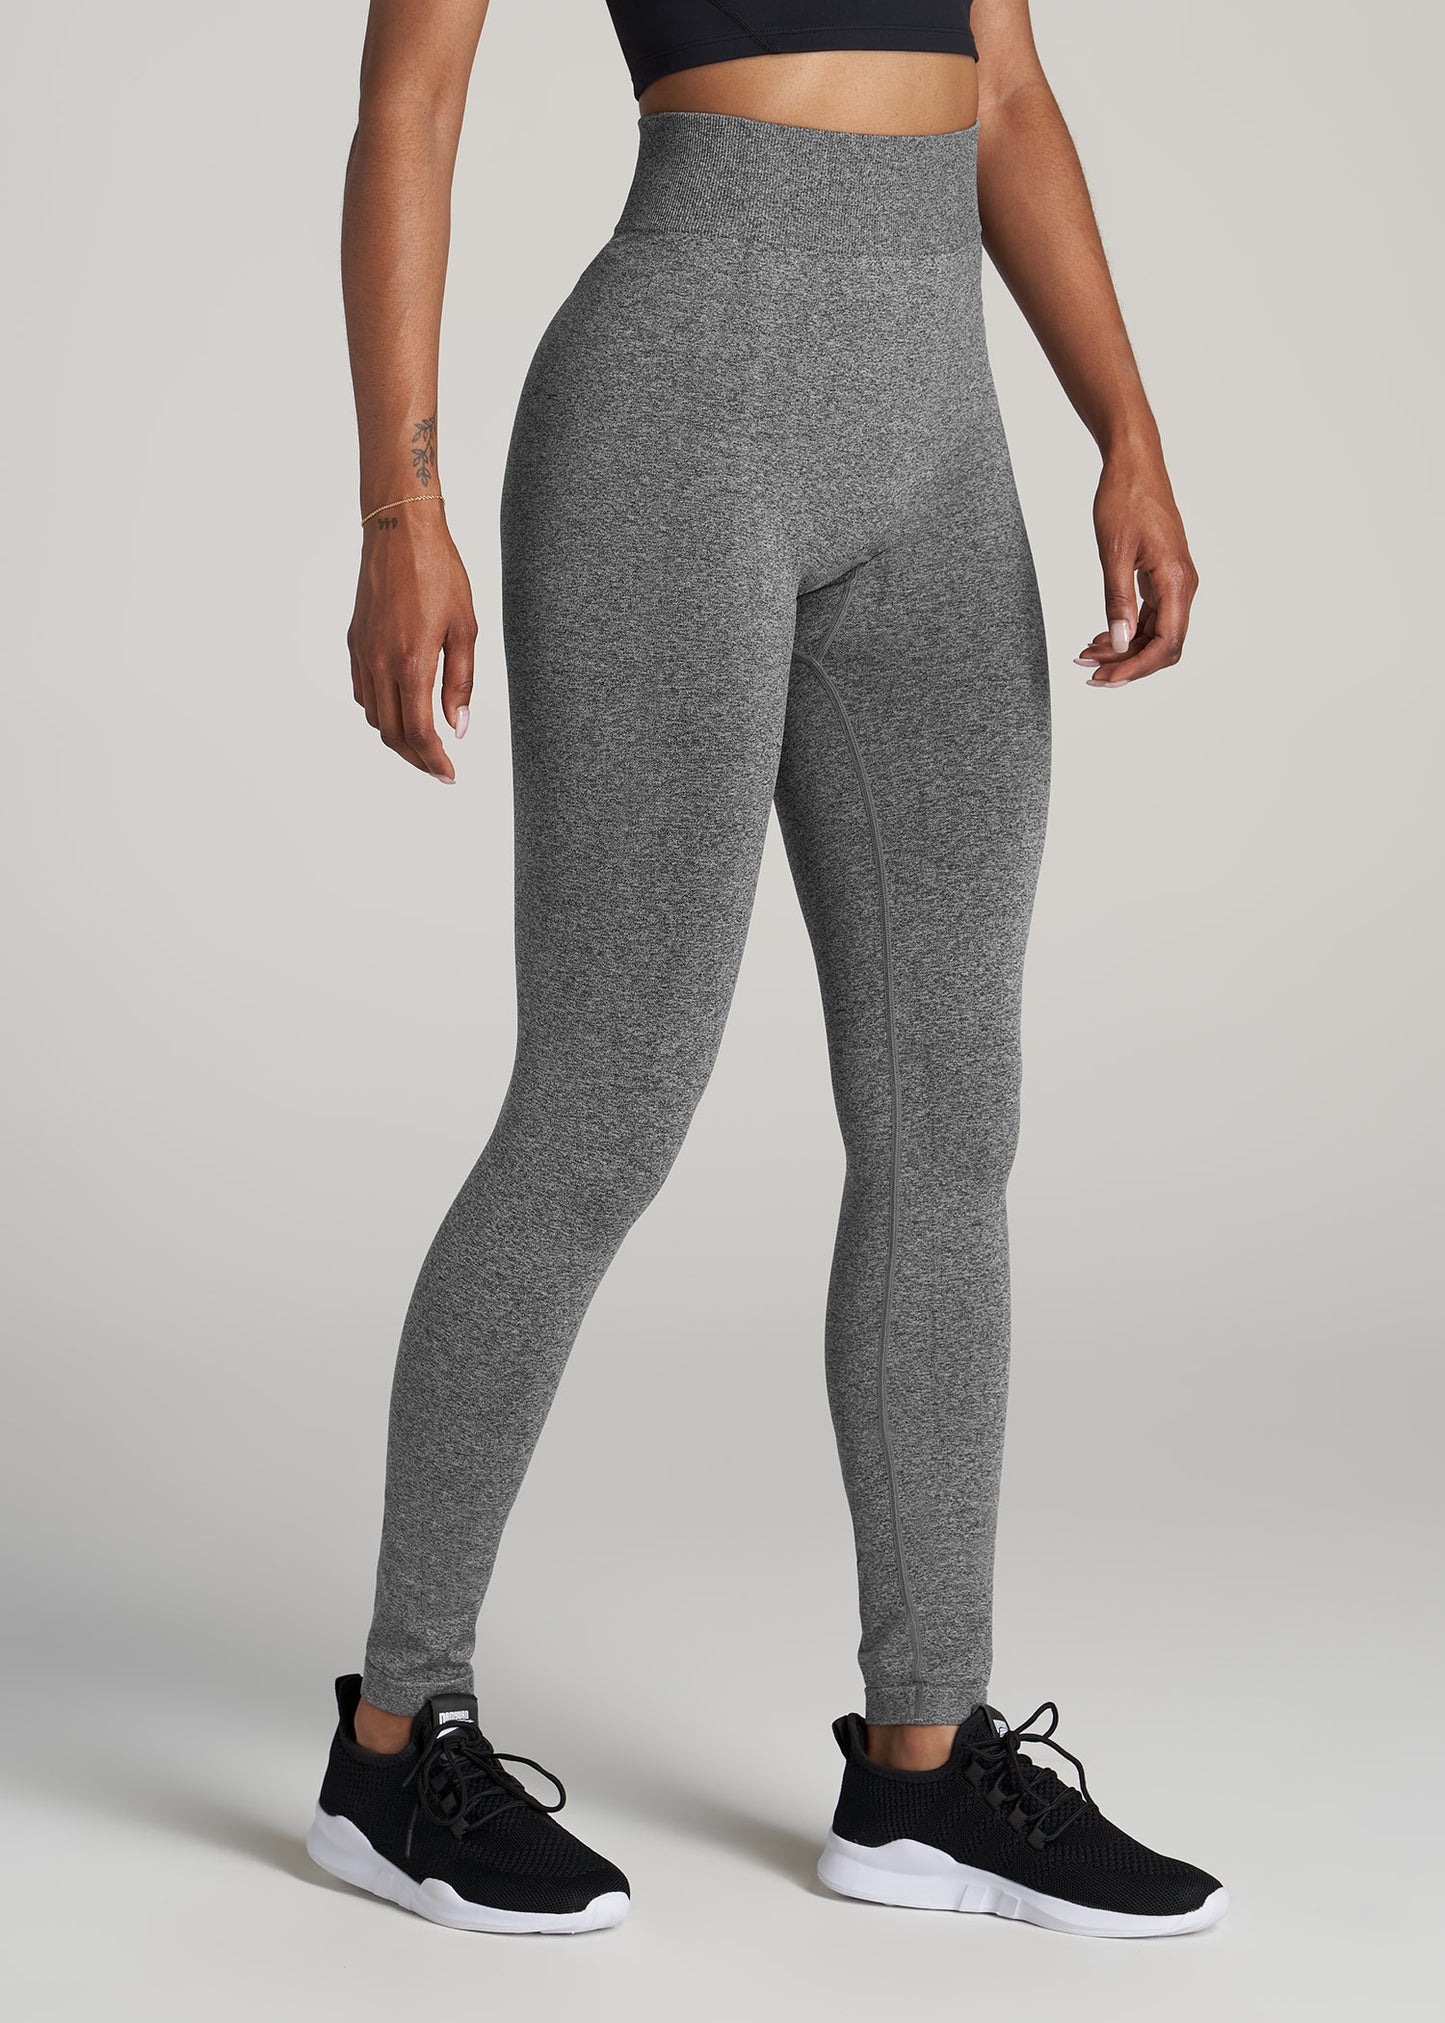 Hard Tail Women's Flat Waist Ankle Legging Charcoal Heather Gray XS at   Women's Clothing store